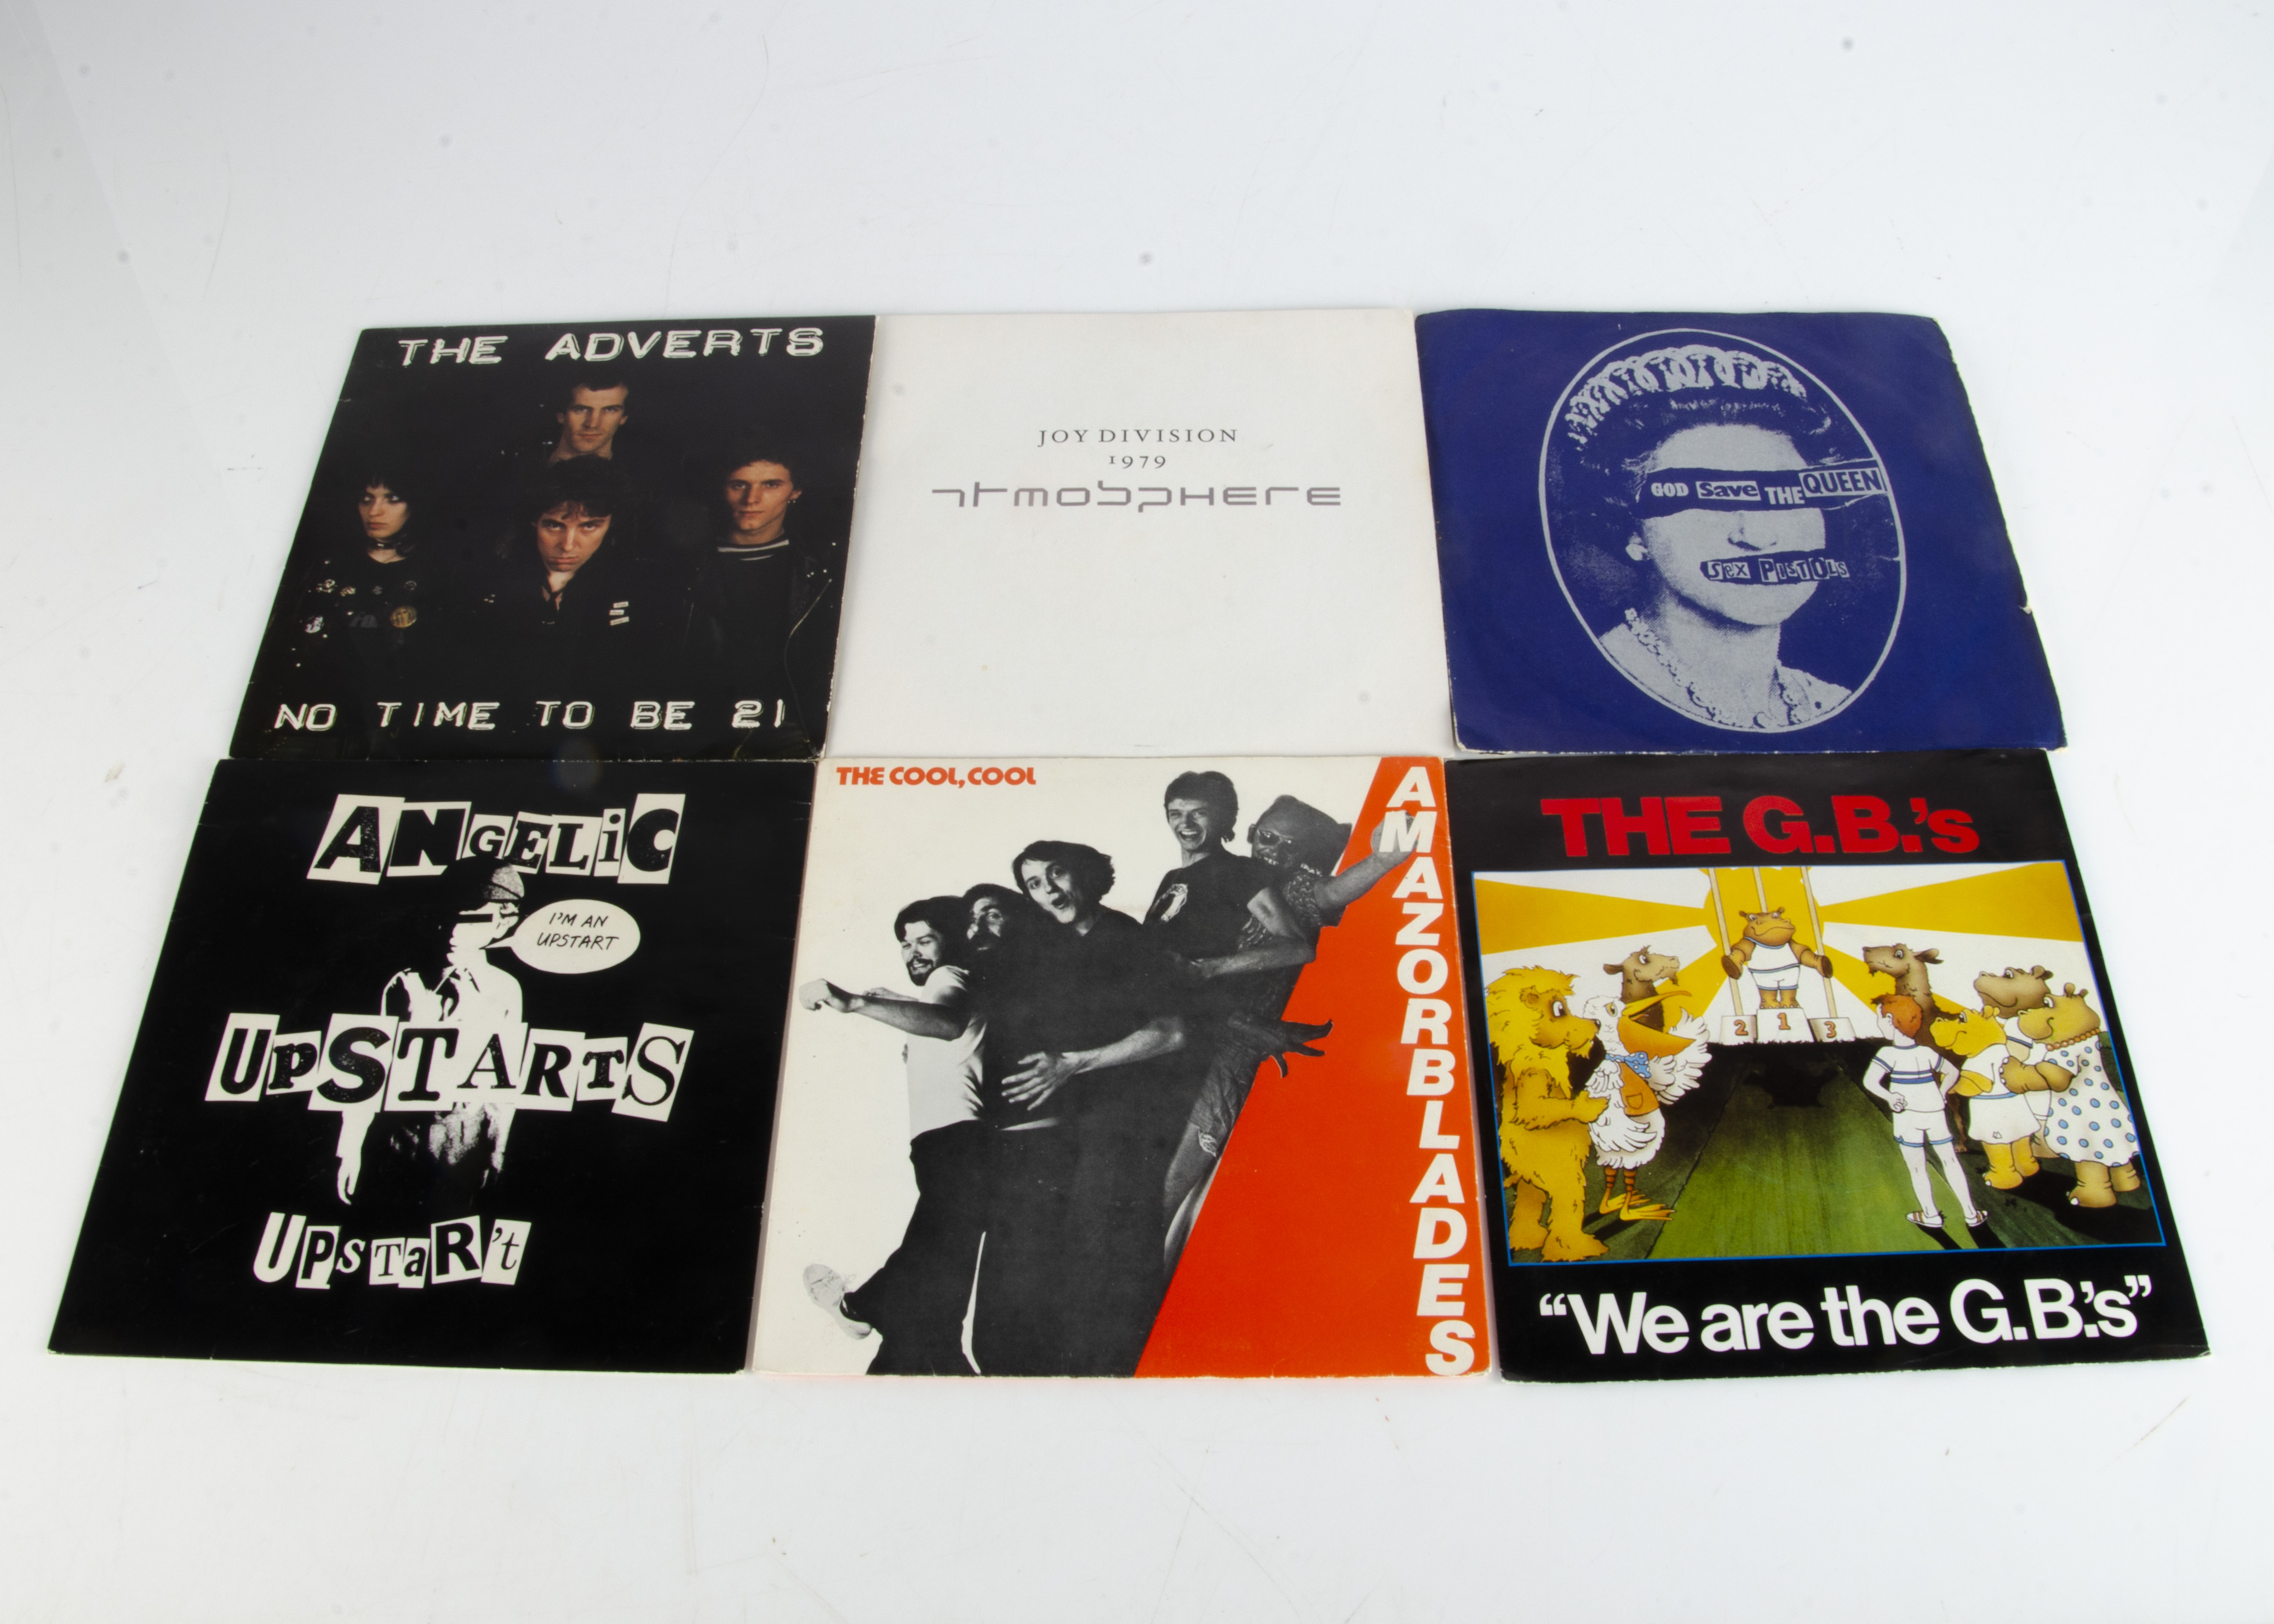 Punk / New Wave 7" Singles, approximately one hundred and twenty singles of mainly Punk, New Wave